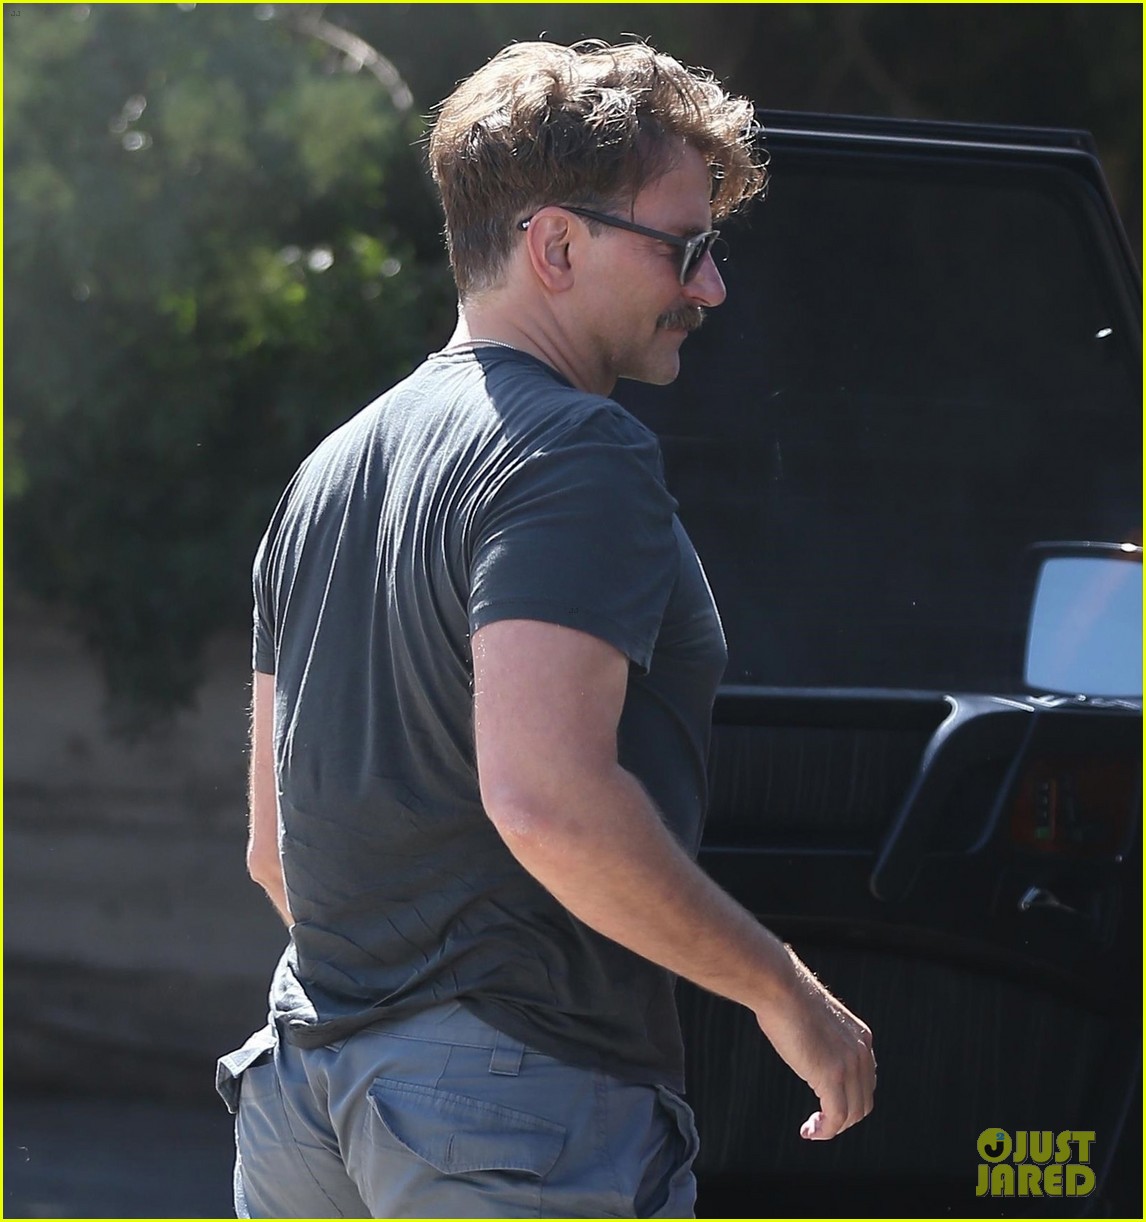 Bradley Cooper Has A New Shorter Haircut Photo 4339505 Bradley Cooper Pictures Just Jared